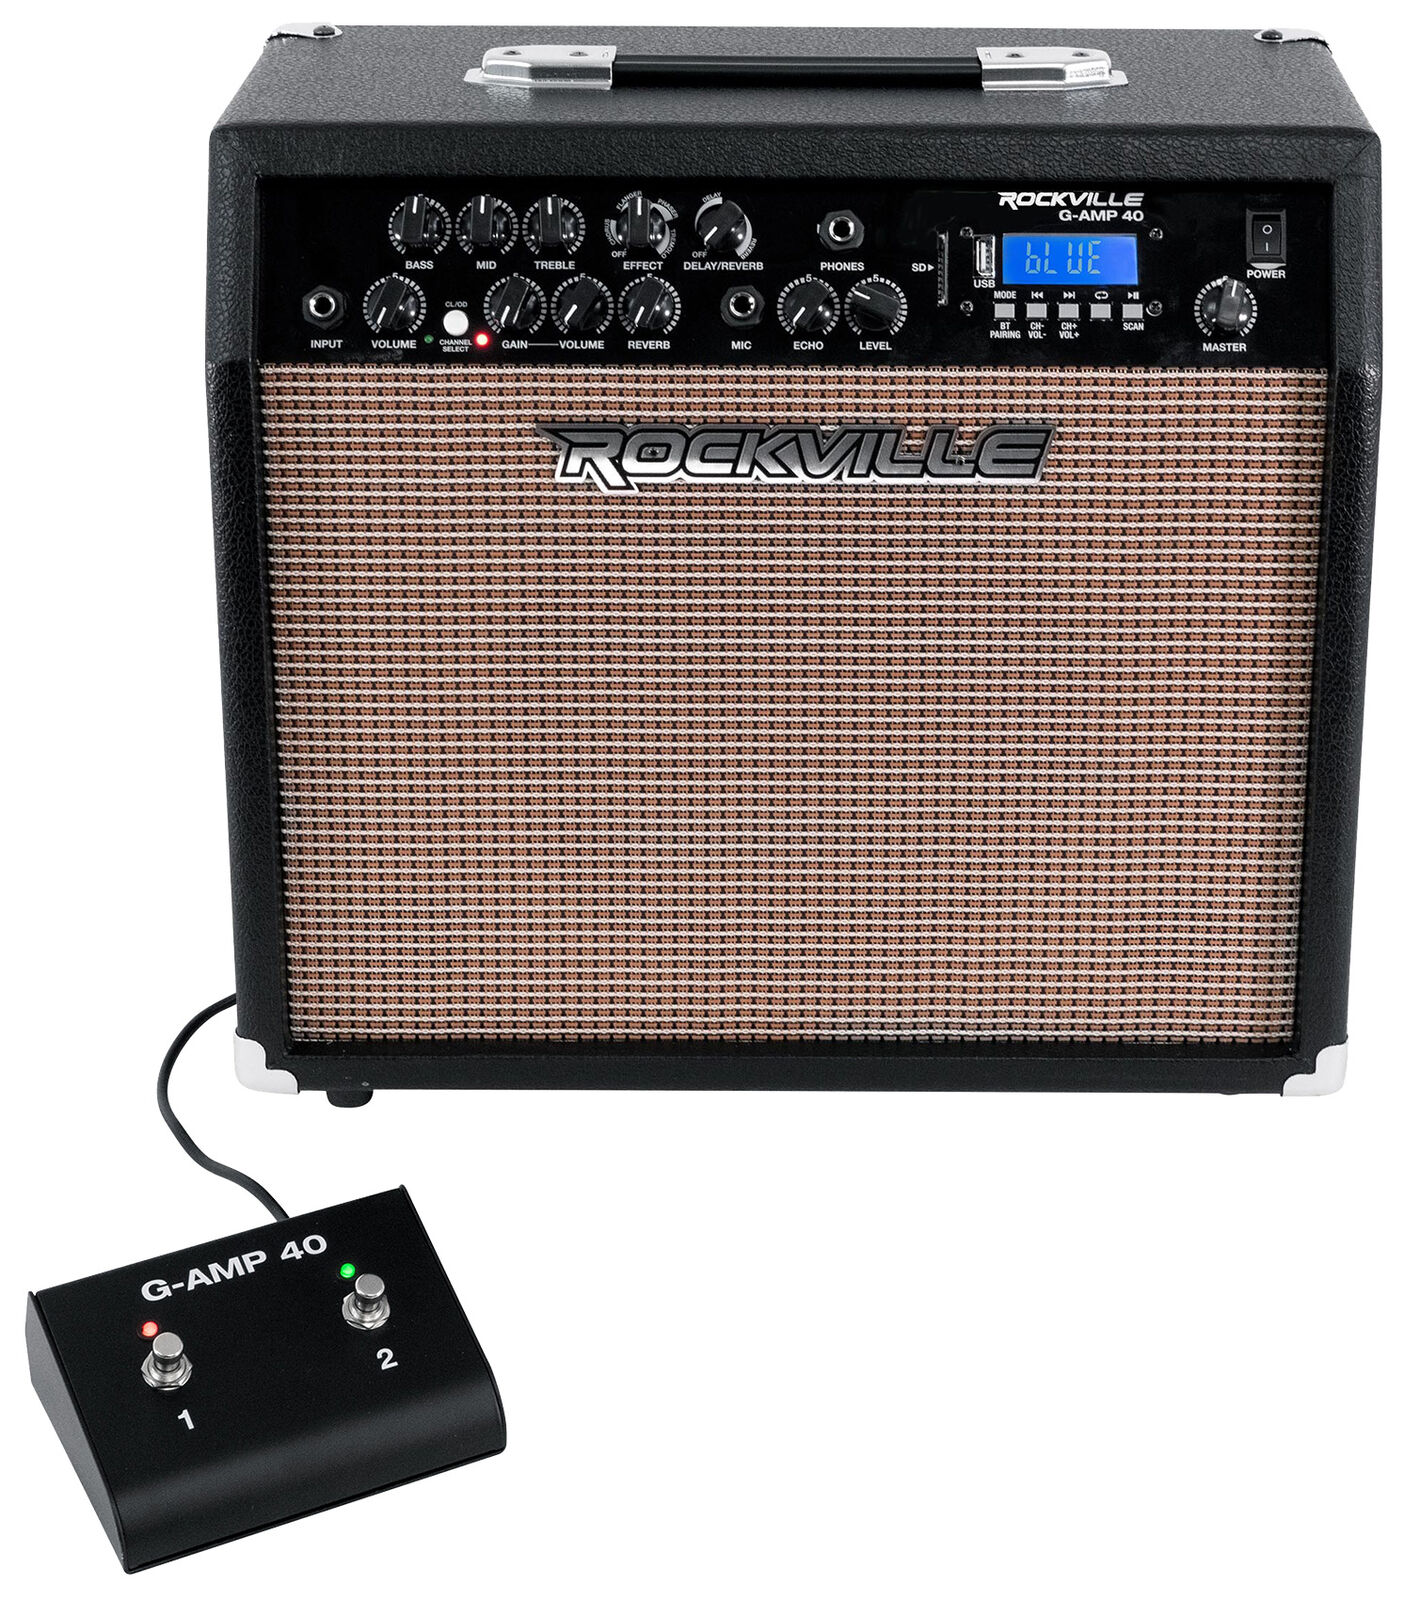 Rockville G-AMP 40 Guitar Combo Amplifier Amp Bluetooth/Mic In/USB/Footswitch